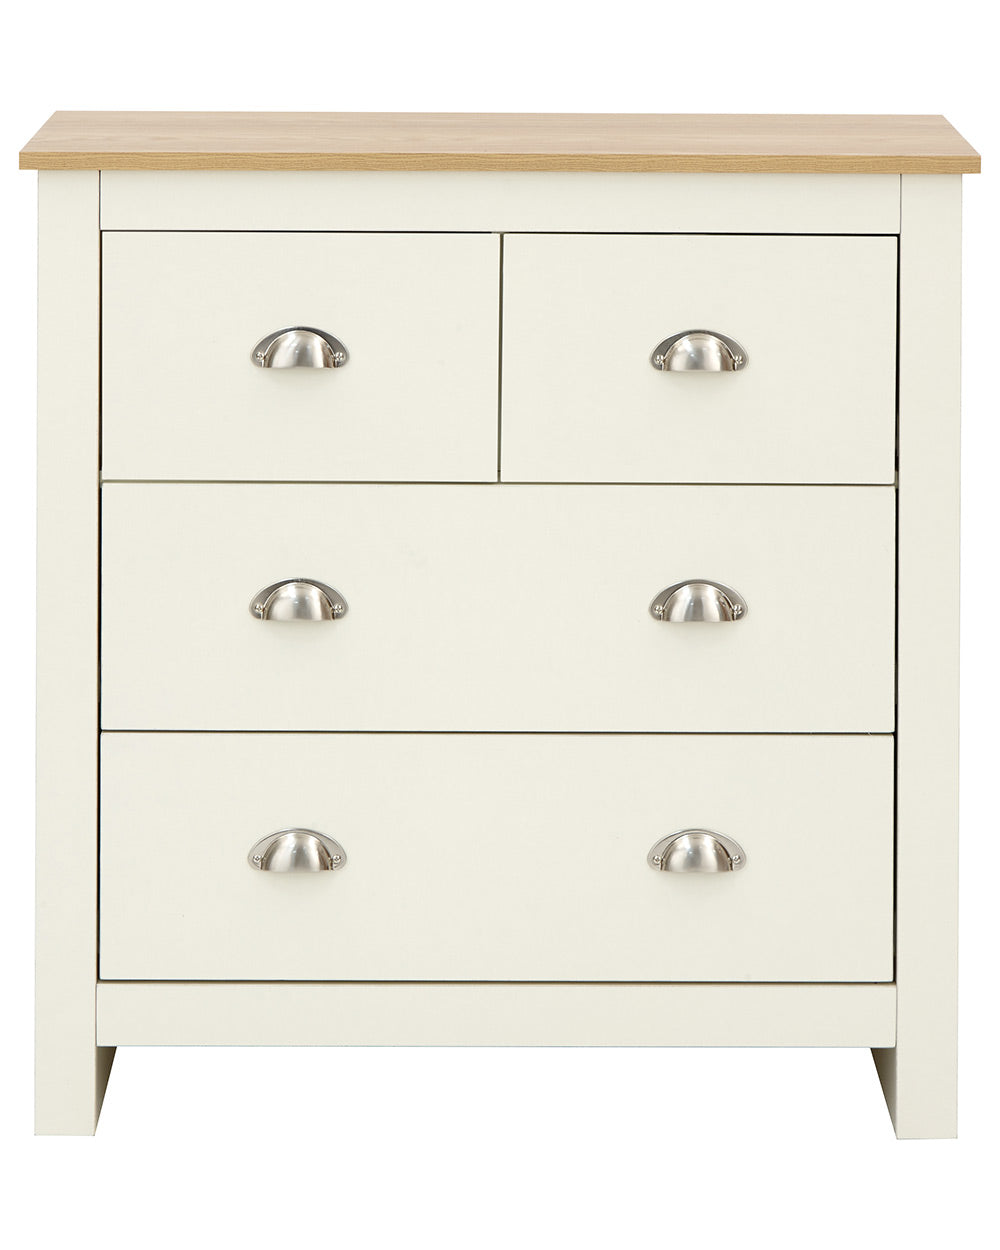 Lancaster 2 + 2 chest of drawers in cream with an oak effect top with all drawers open on a white cut out background